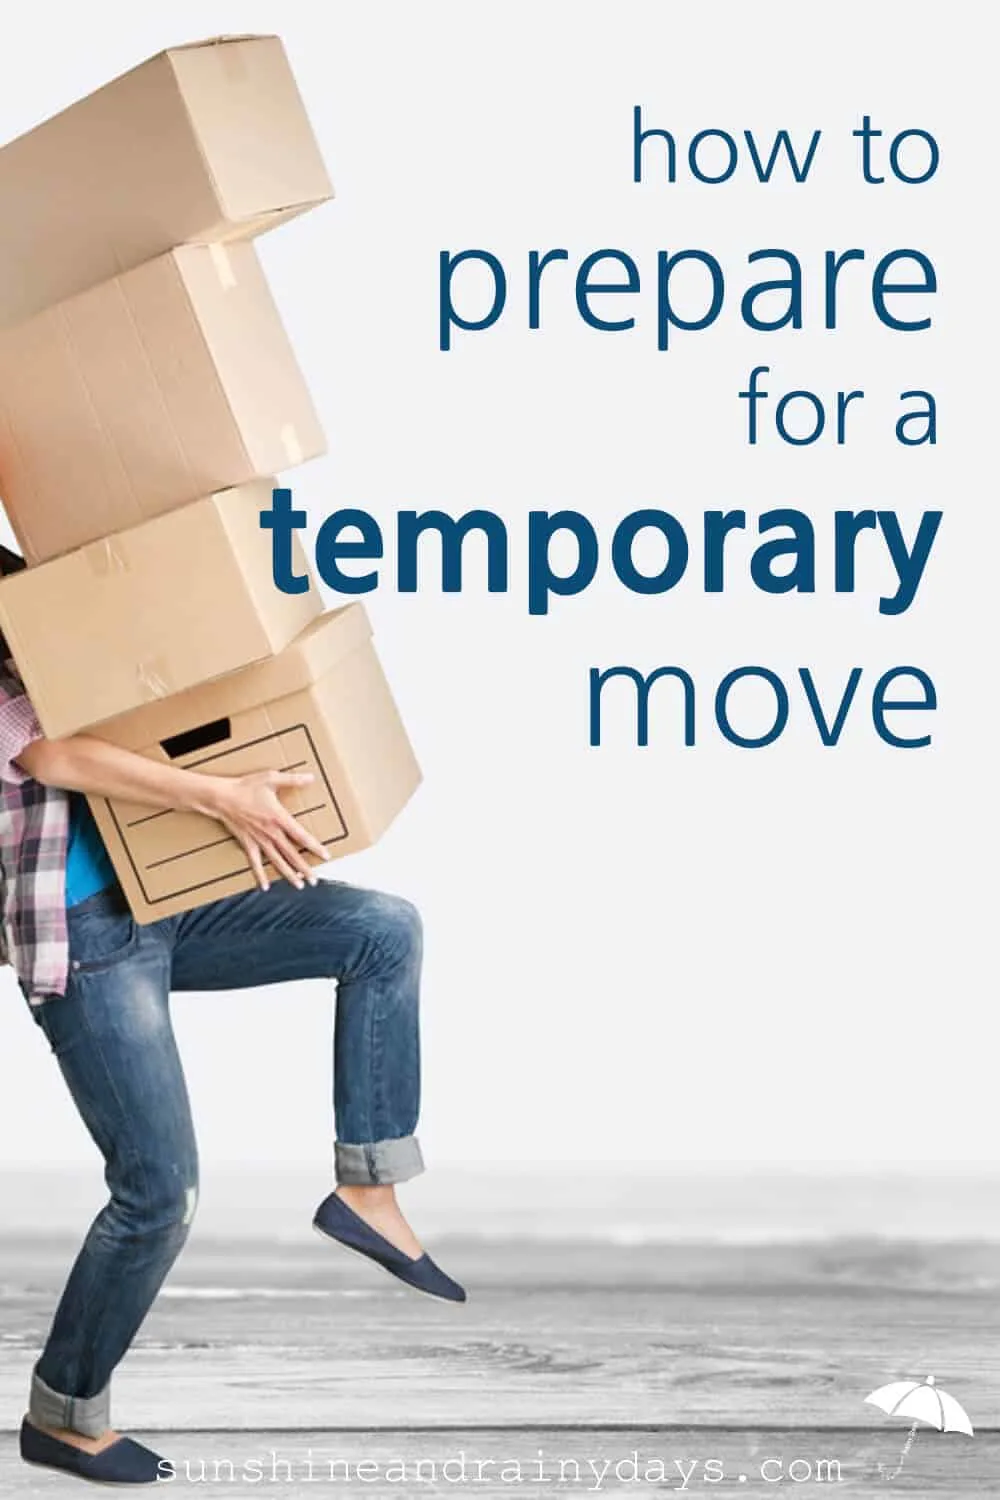 https://sunshineandrainydays.com/wp-content/uploads/2017/04/How-To-Prepare-For-A-Temporary-Move-P.jpg.webp